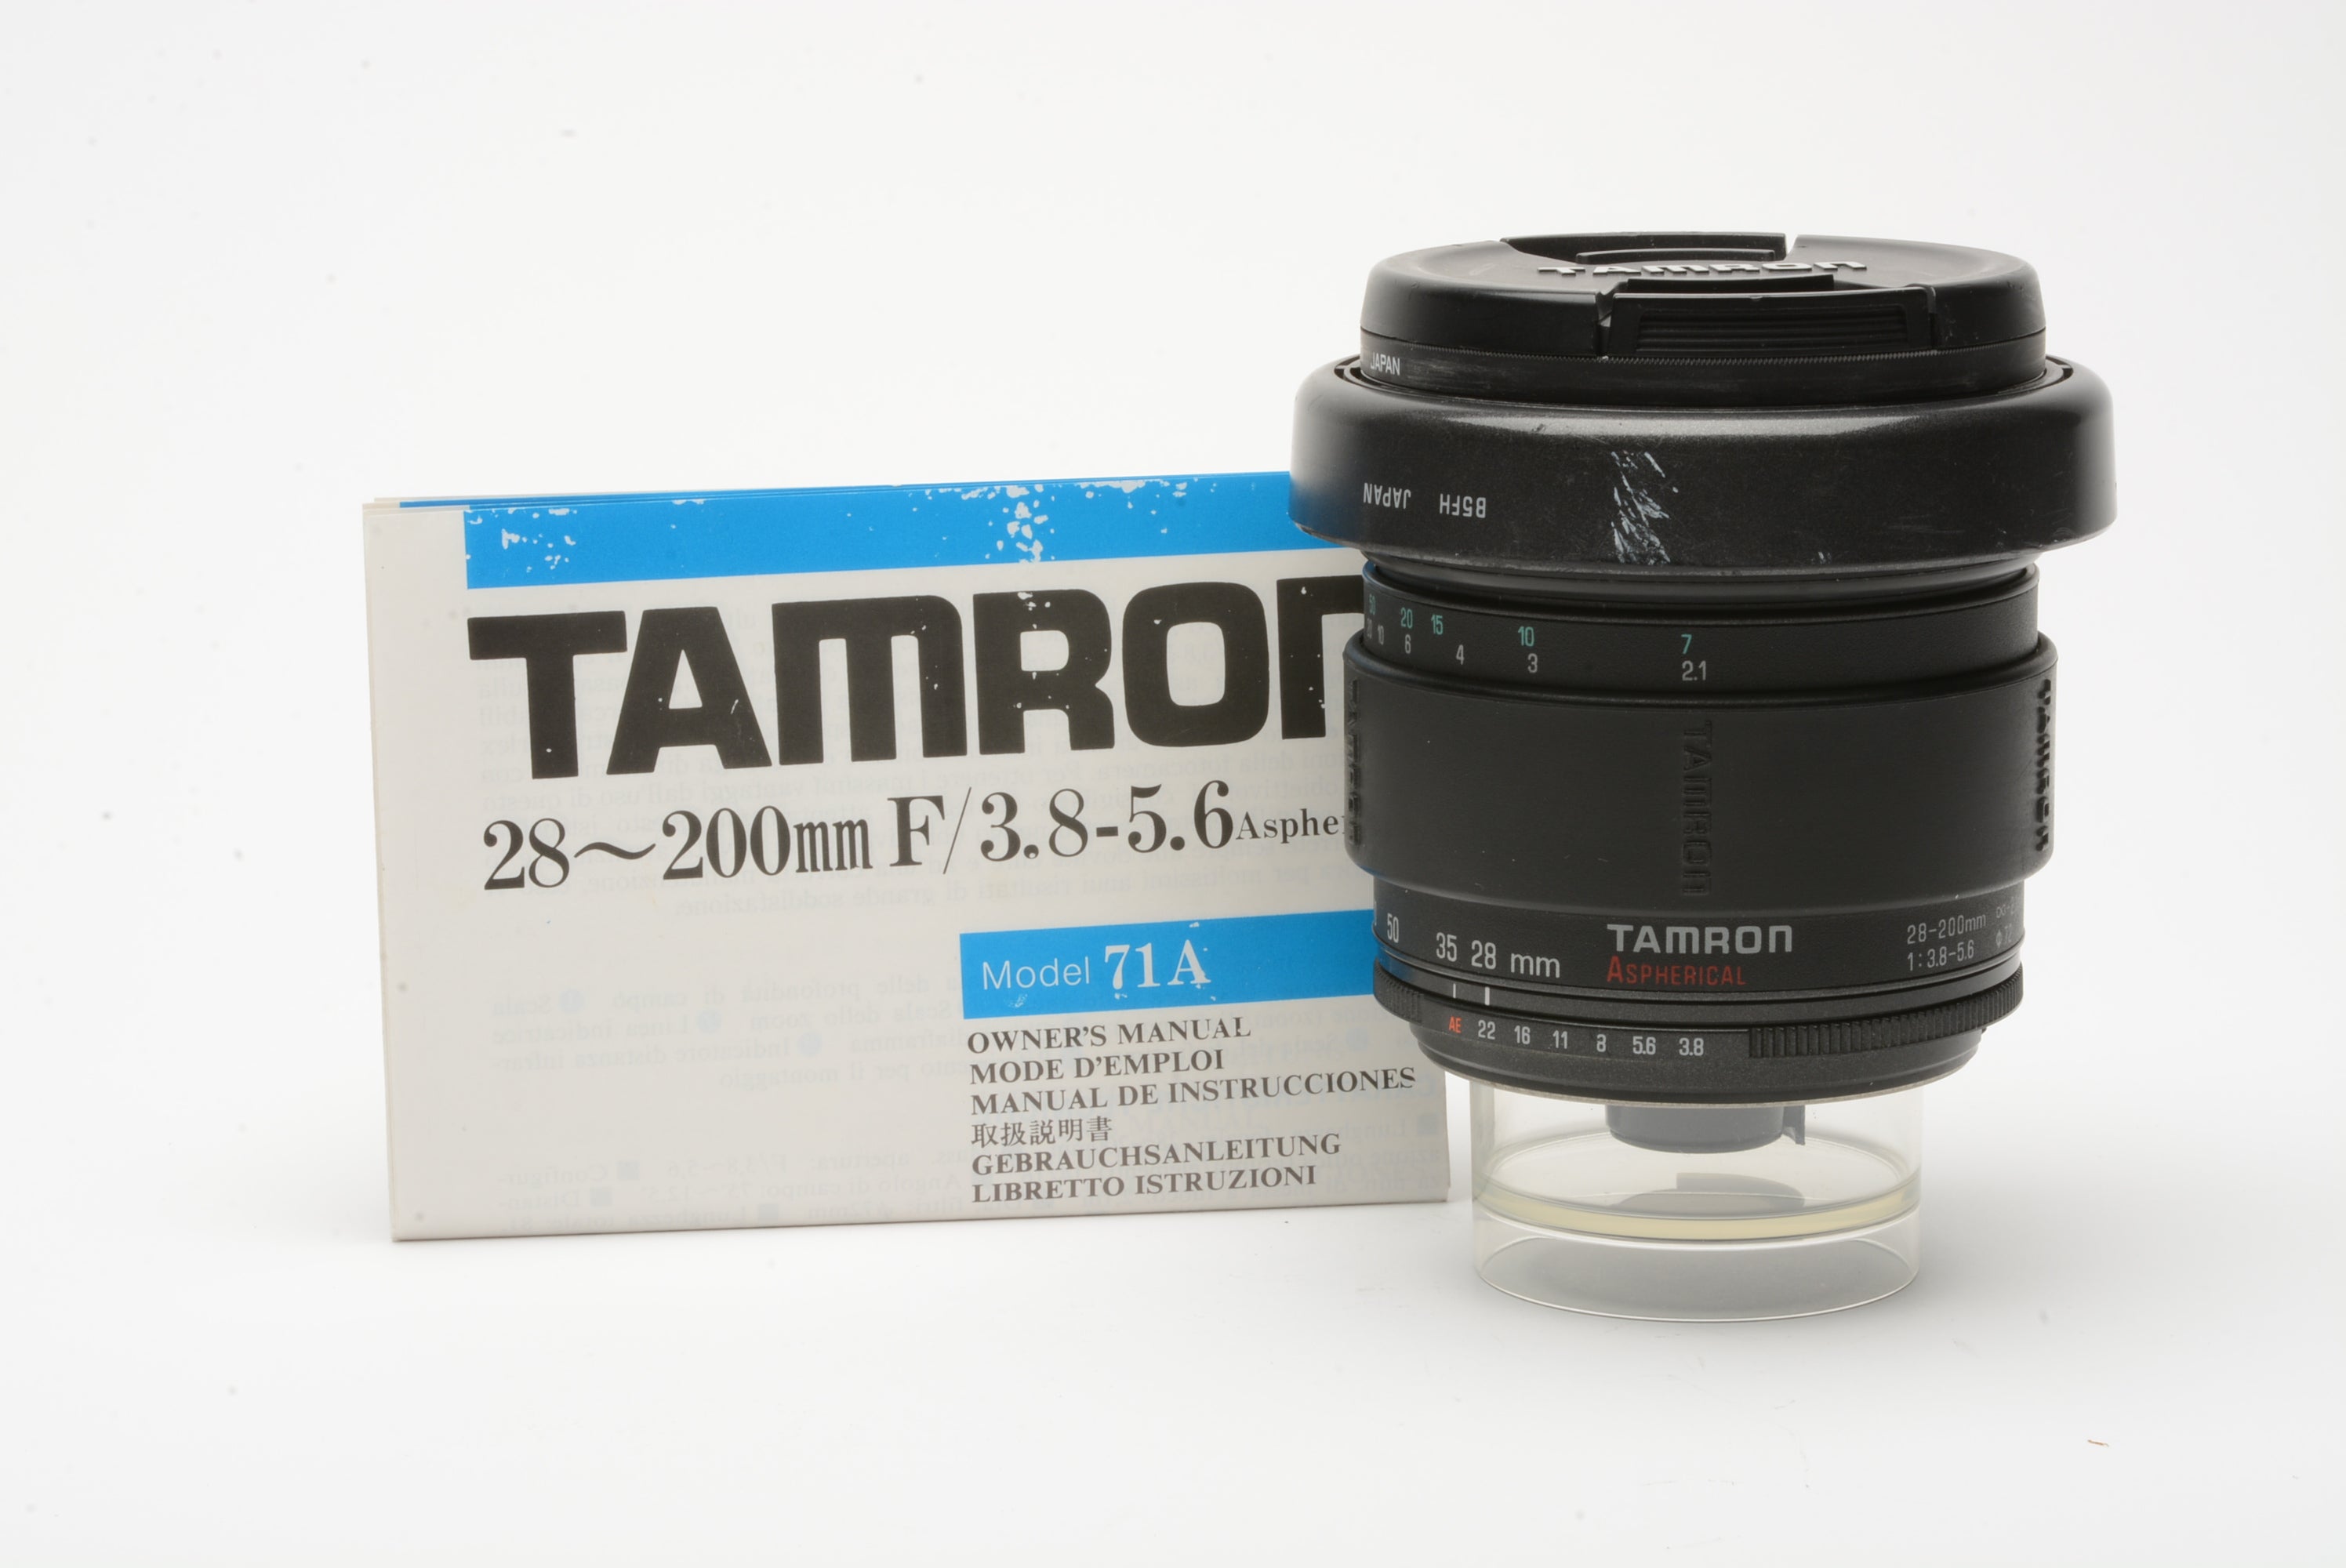 Tamron MF 28-200mm f3.8-5.6 Aspherical zoom lens 71A w/choice of